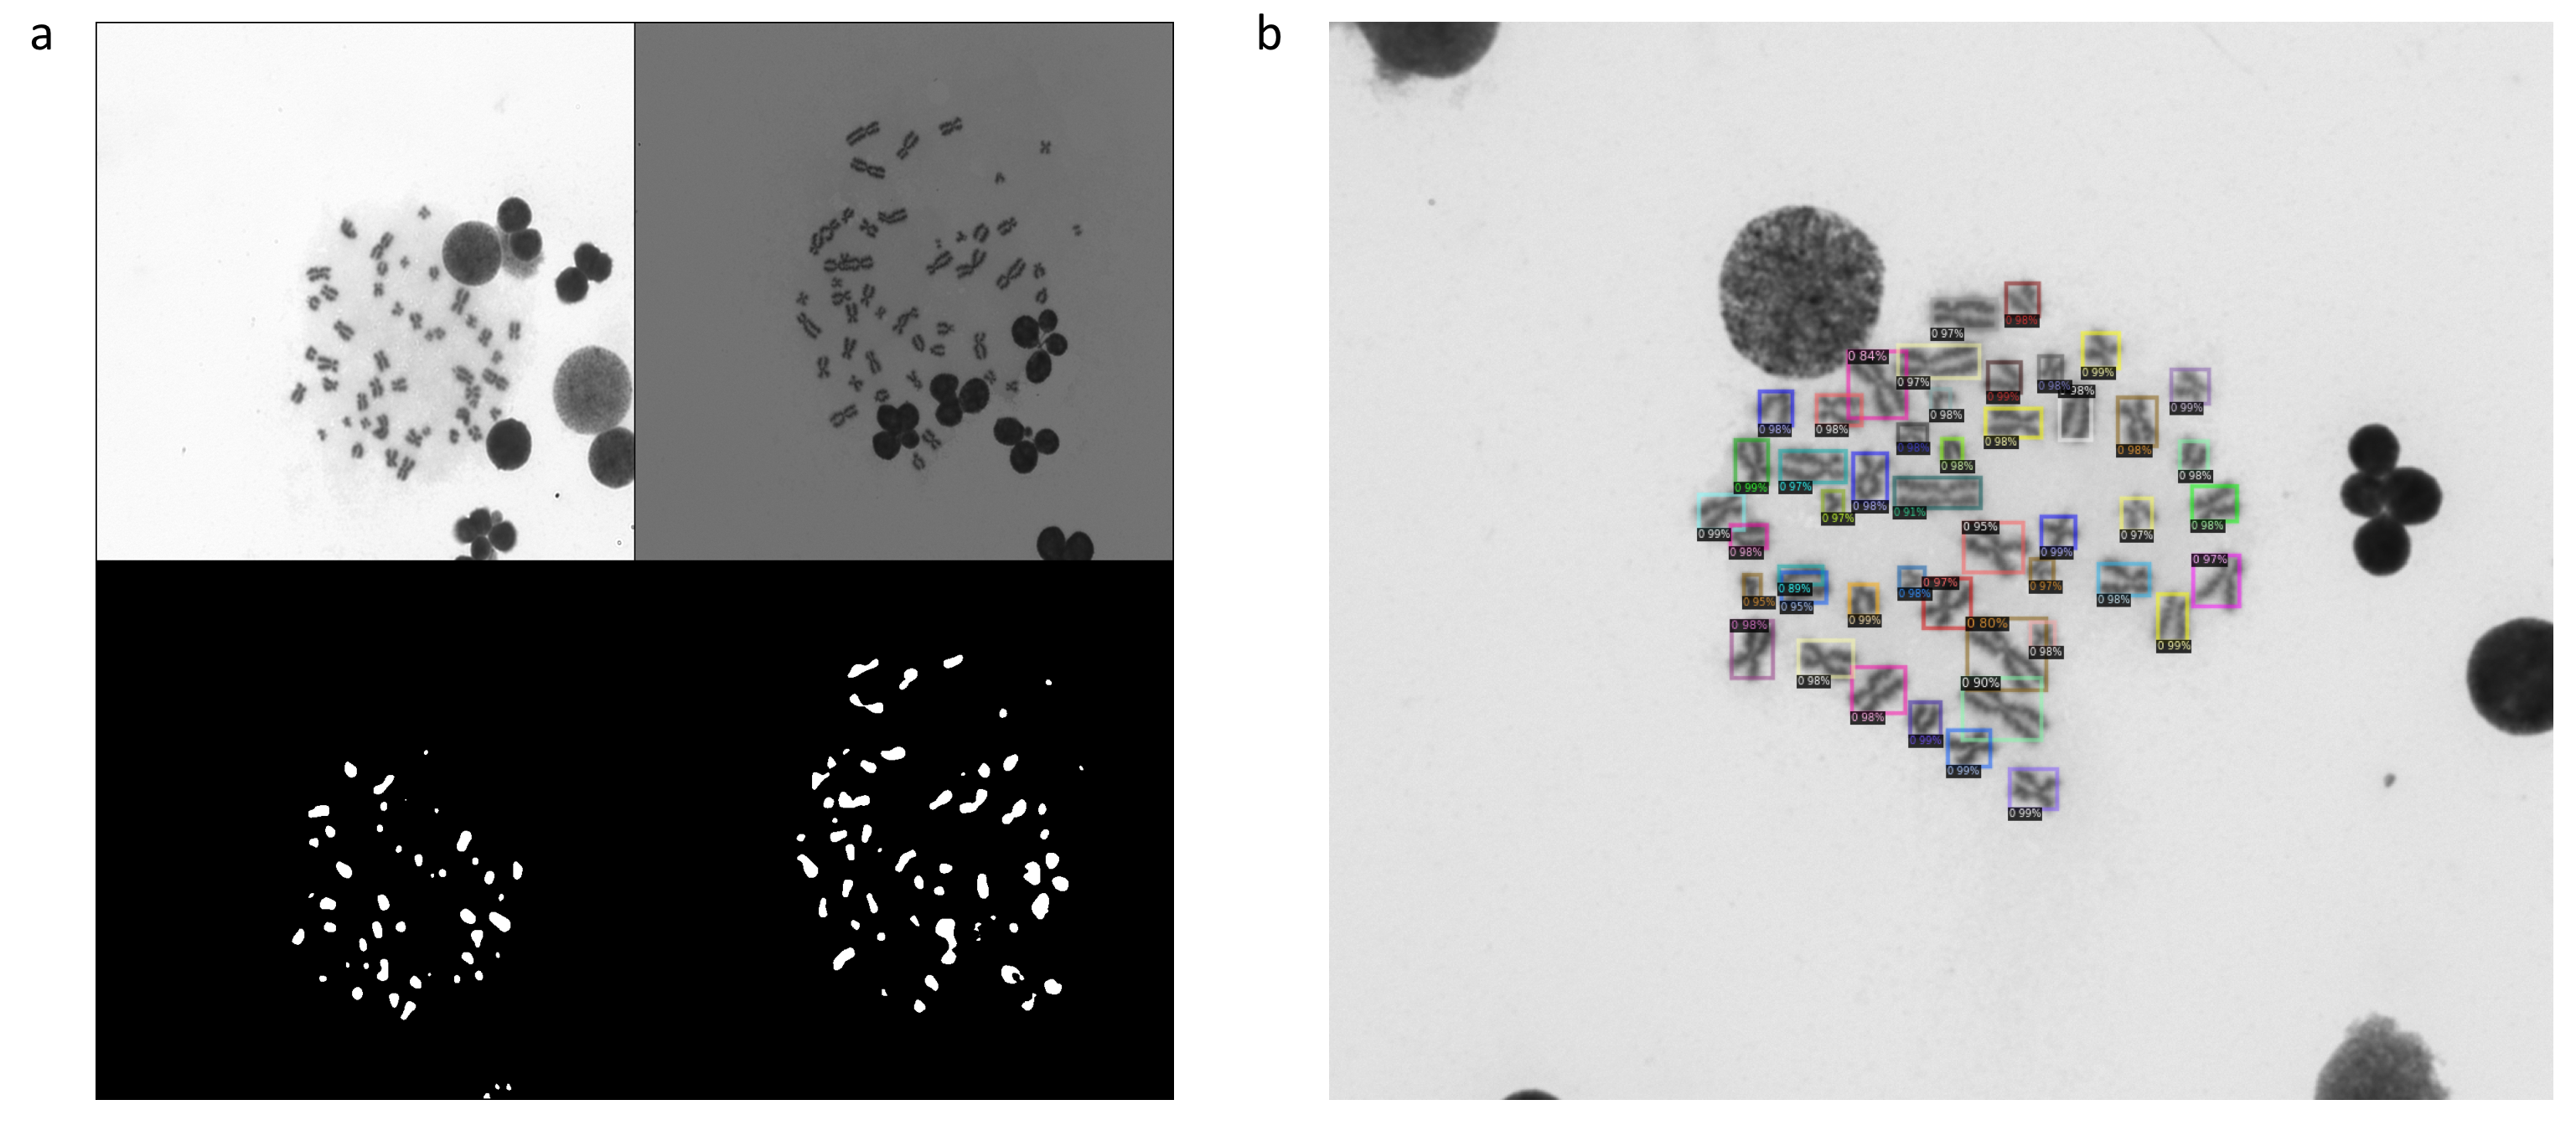 Localization of chromosomes in GIEMSA images.a, A pair of GIEMSA images and the segmentation maps by U-Net. b, The rectangles correspond to the chromosome locations predicted by Faster R-CNN. Each score is a class confidence metric.